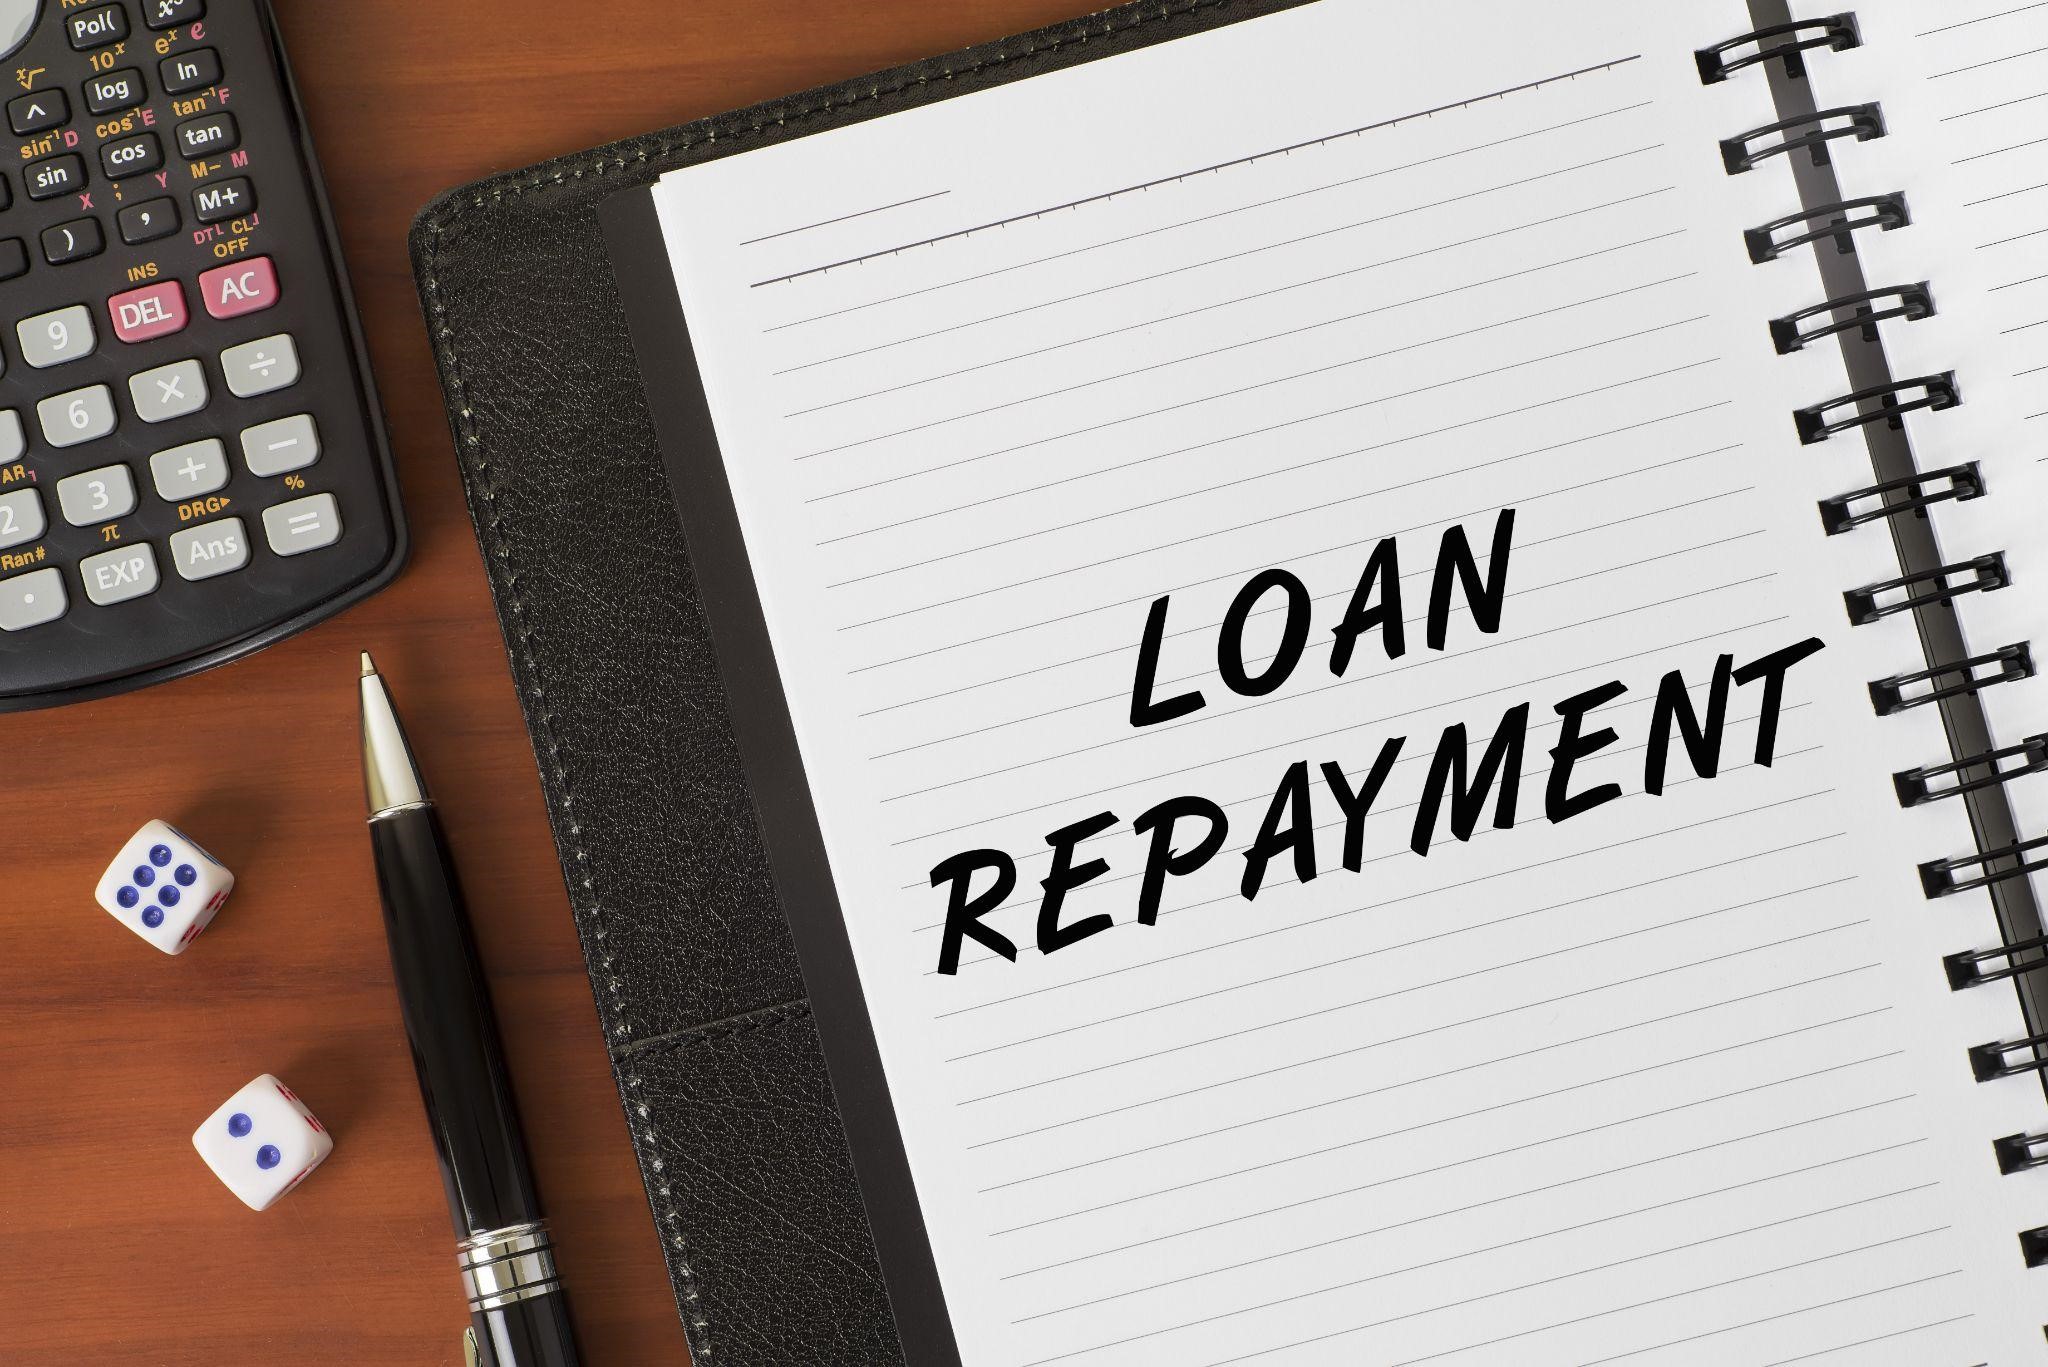 Loan Repayment: Types, Payment Schedule And How It Works